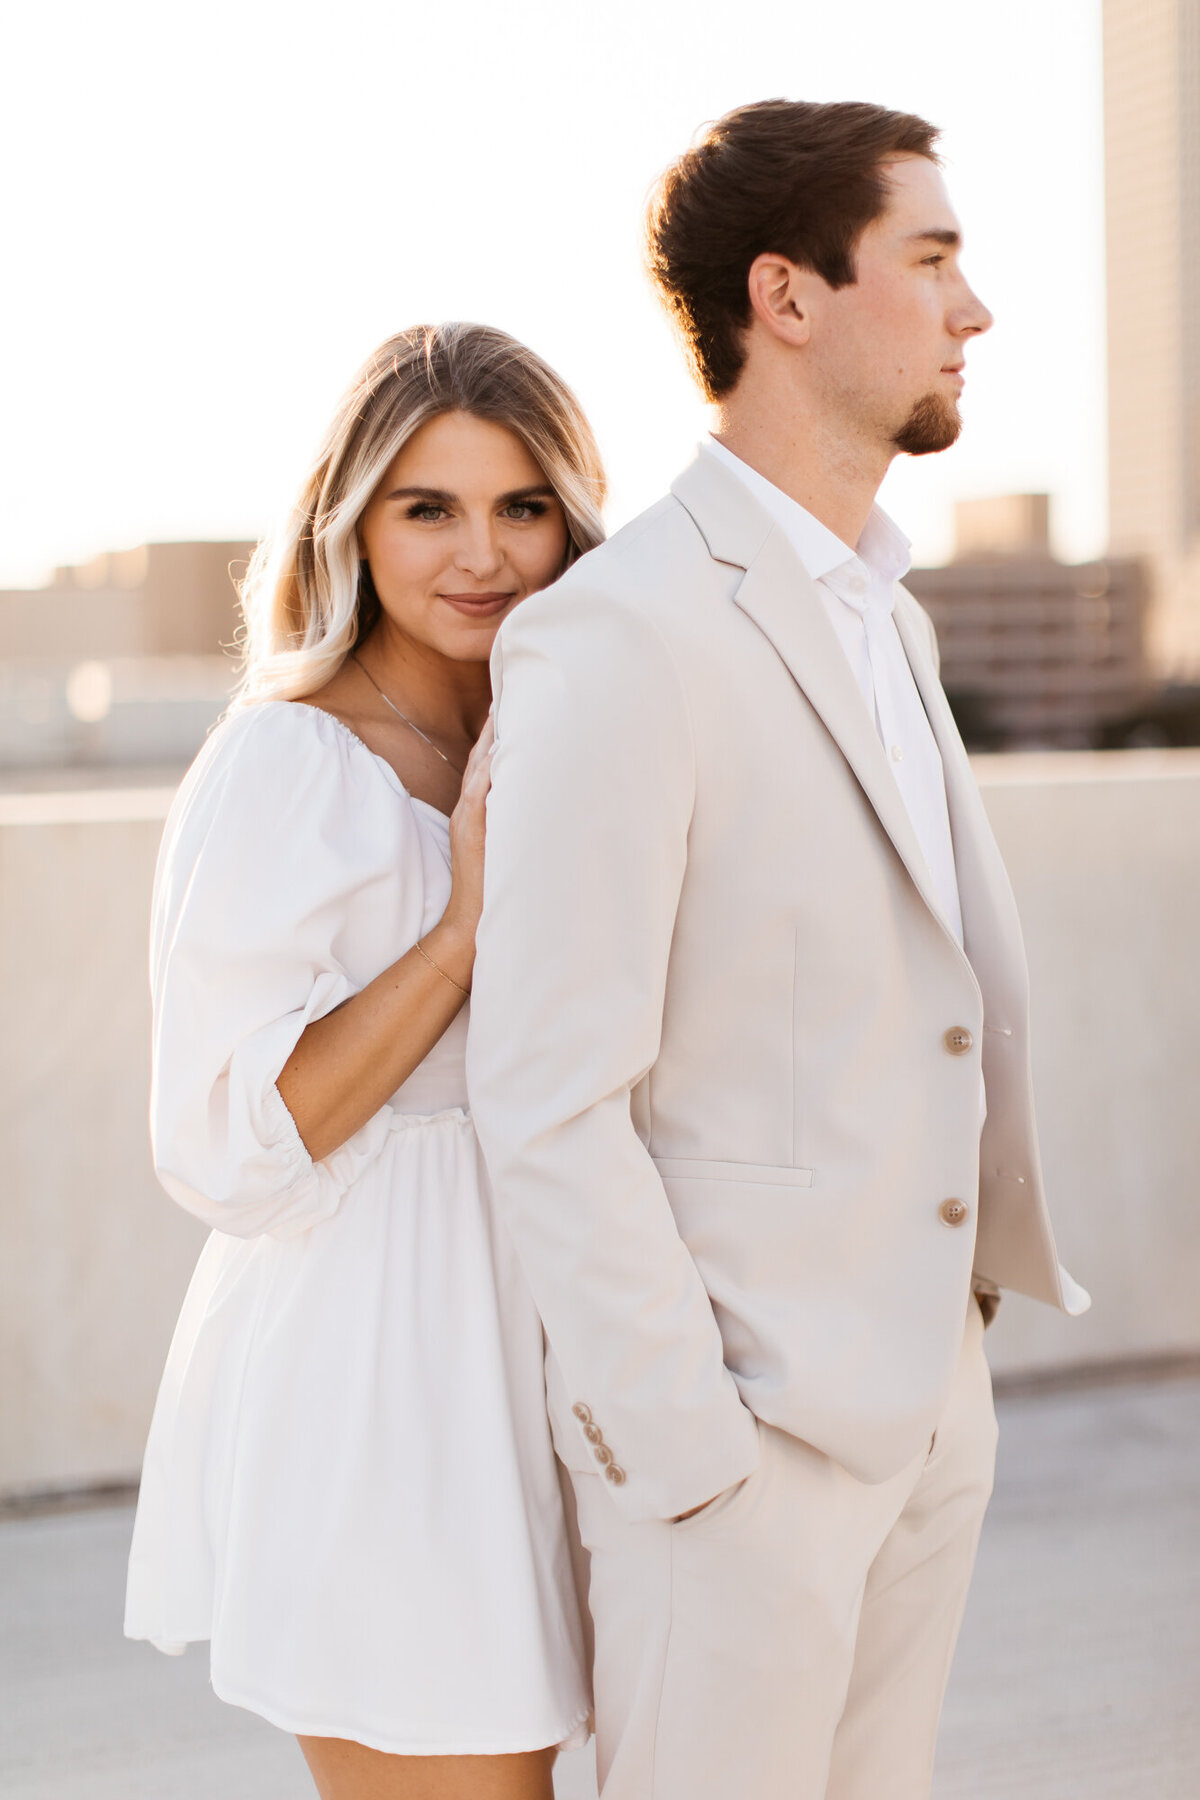 downtown fort worth engagement session-6